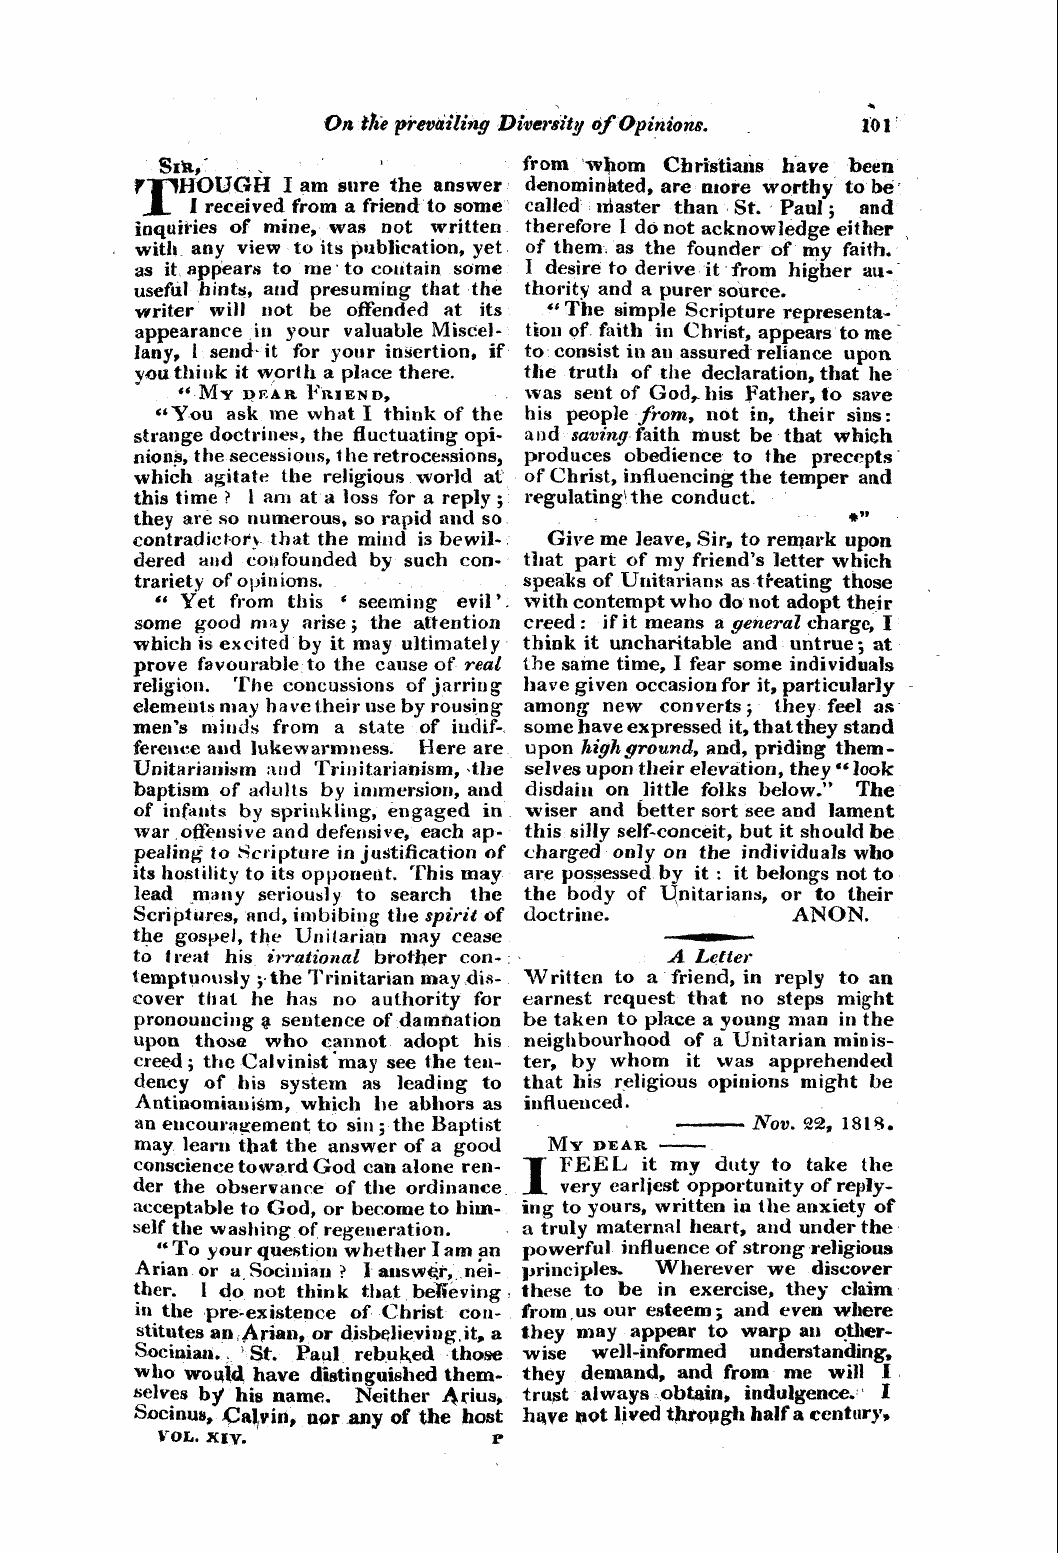 Monthly Repository (1806-1838) and Unitarian Chronicle (1832-1833): F Y, 1st edition, Supplement - On The Prevailing Diversity Of Opinions....